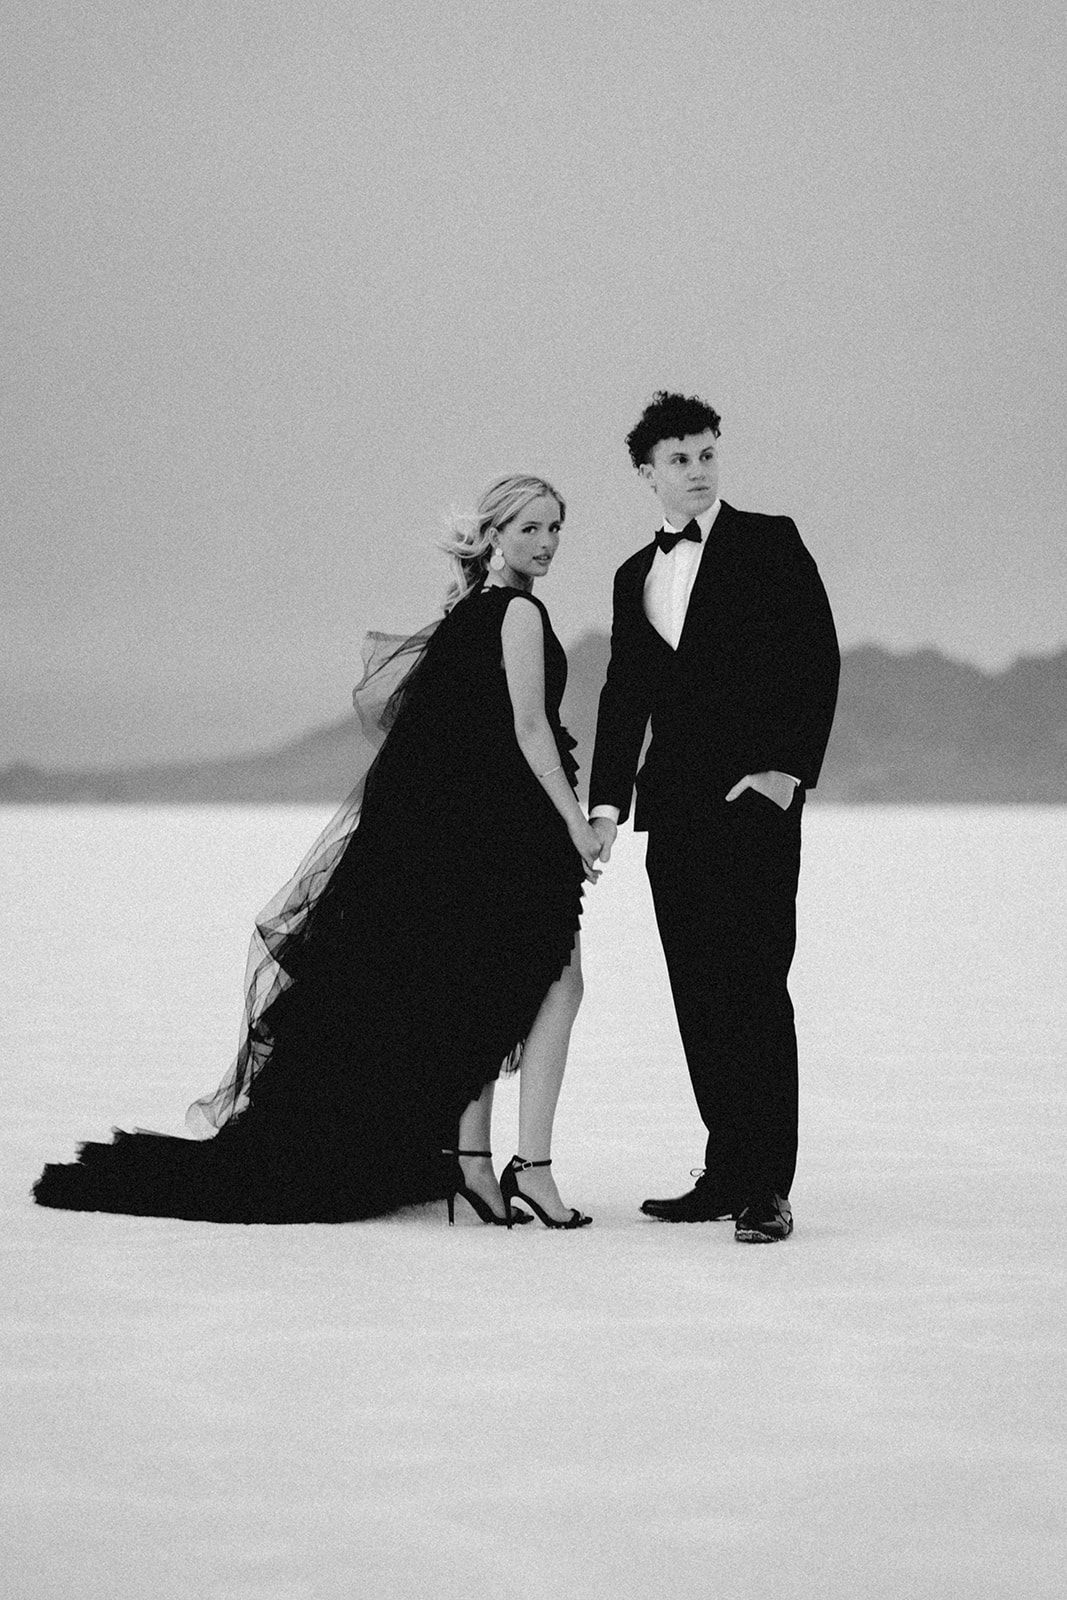 Classic black tuxedo in focus with woment black tulle dress at Utah photographer’s Salt Flats session.